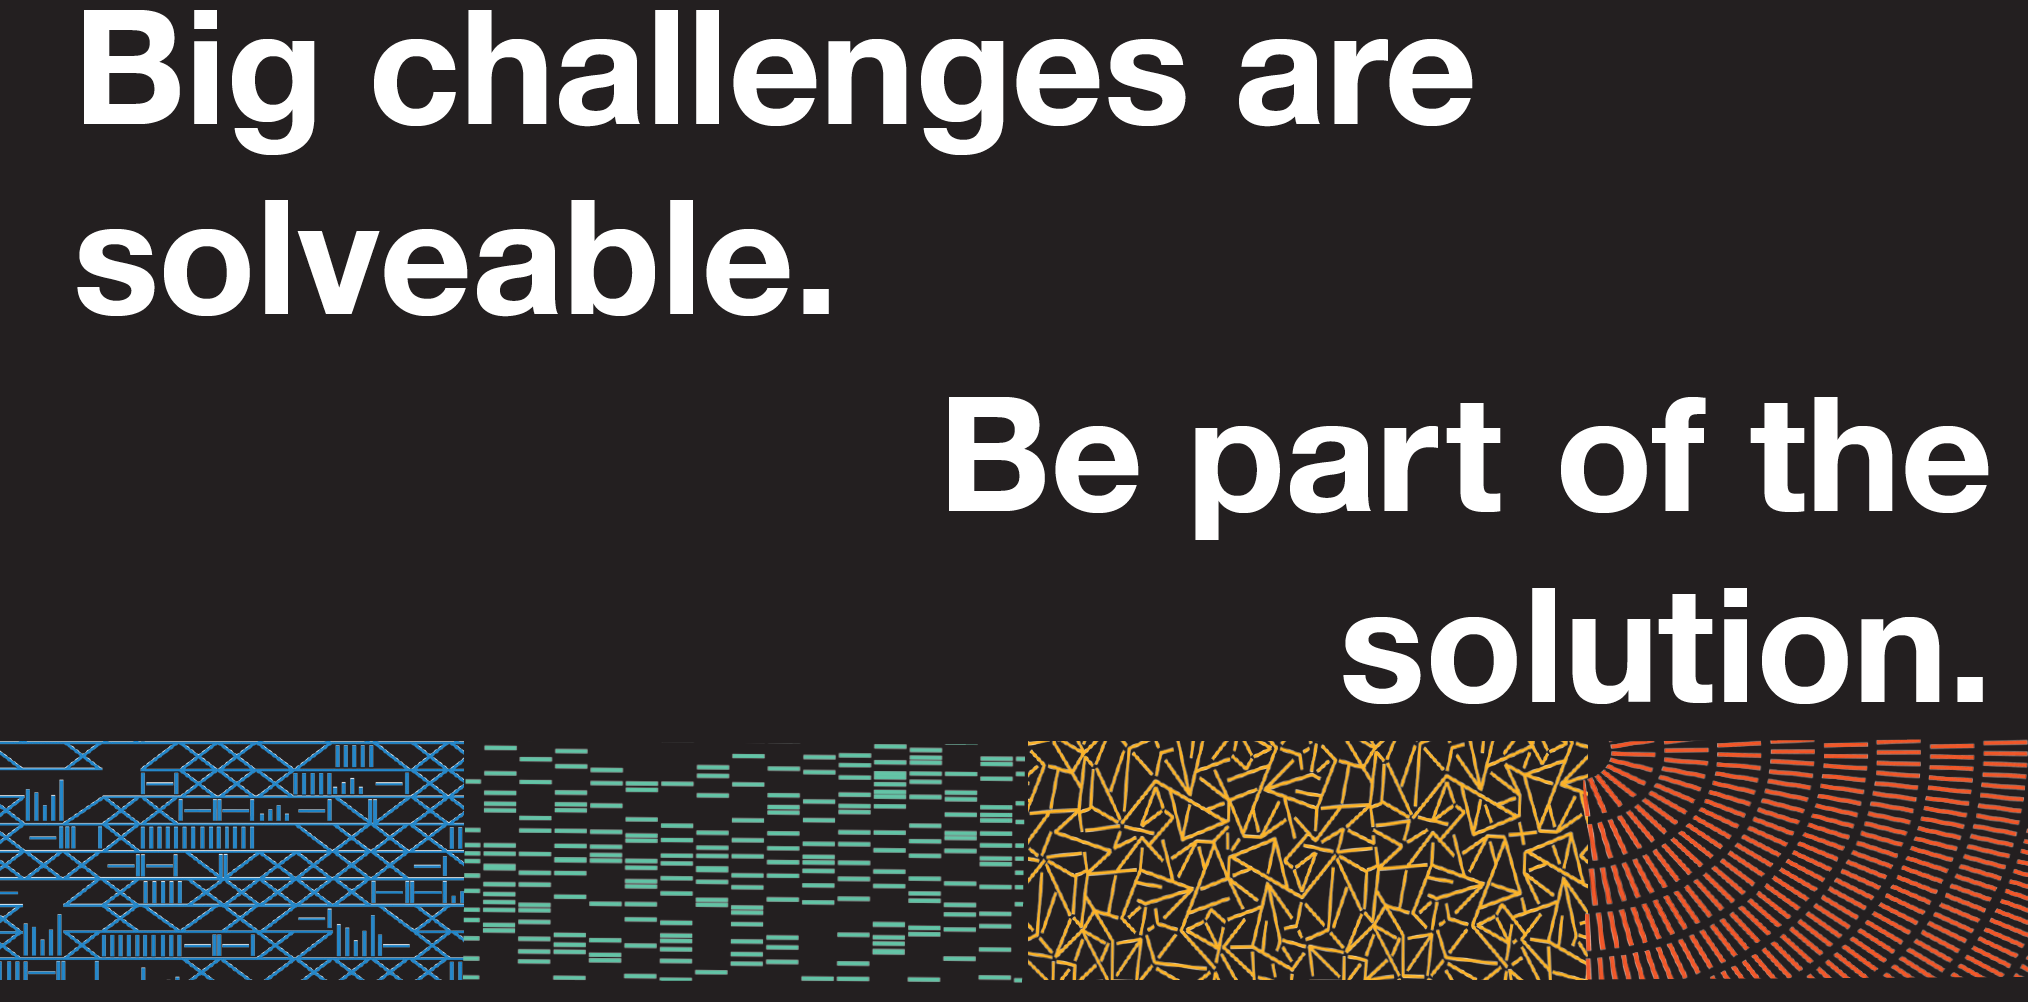 Big challenges are solveable.  Be part of the solution.